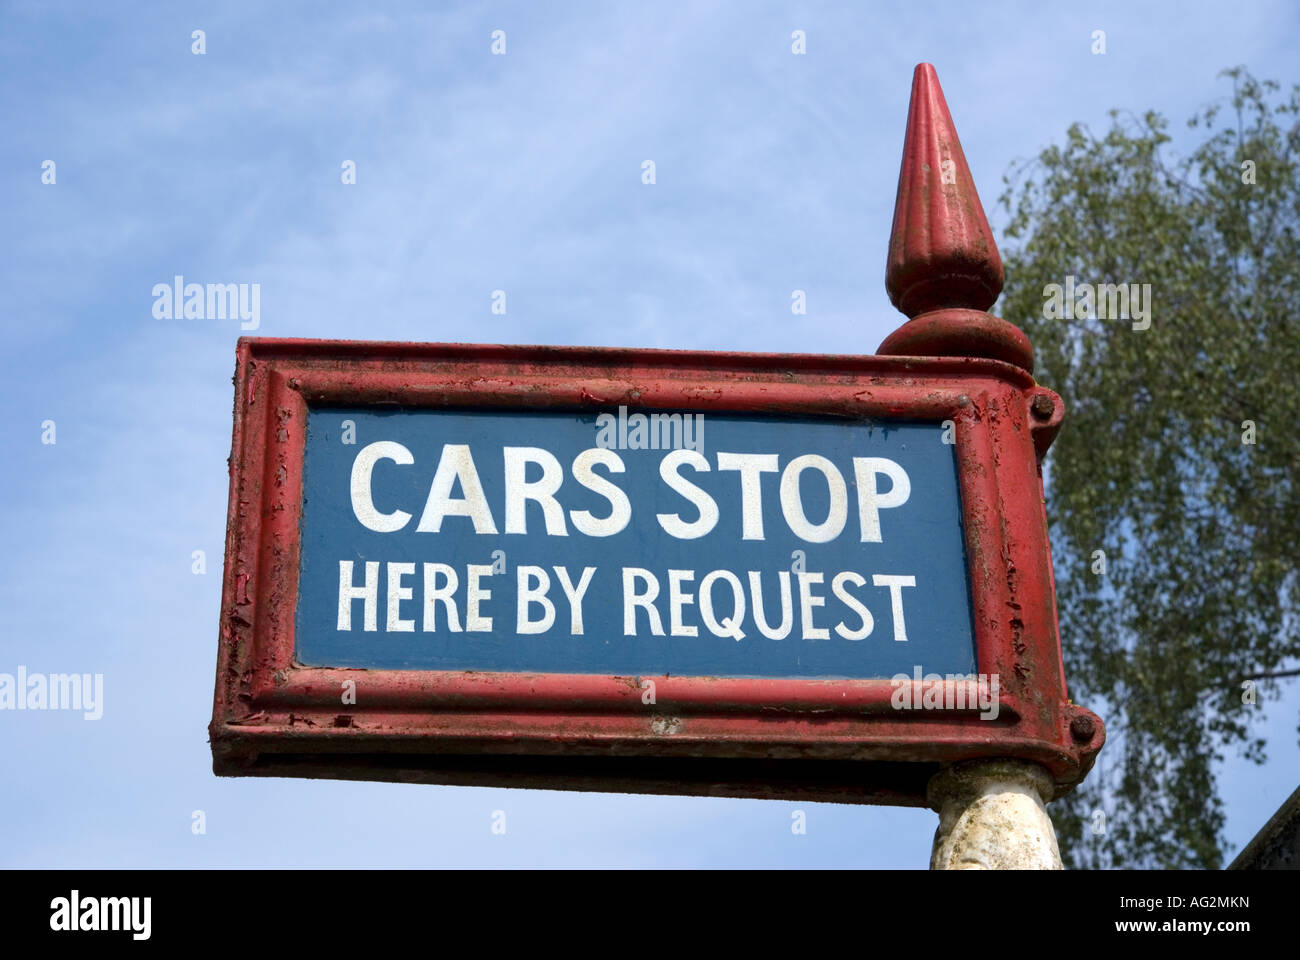 cars stop here by request Stock Photo